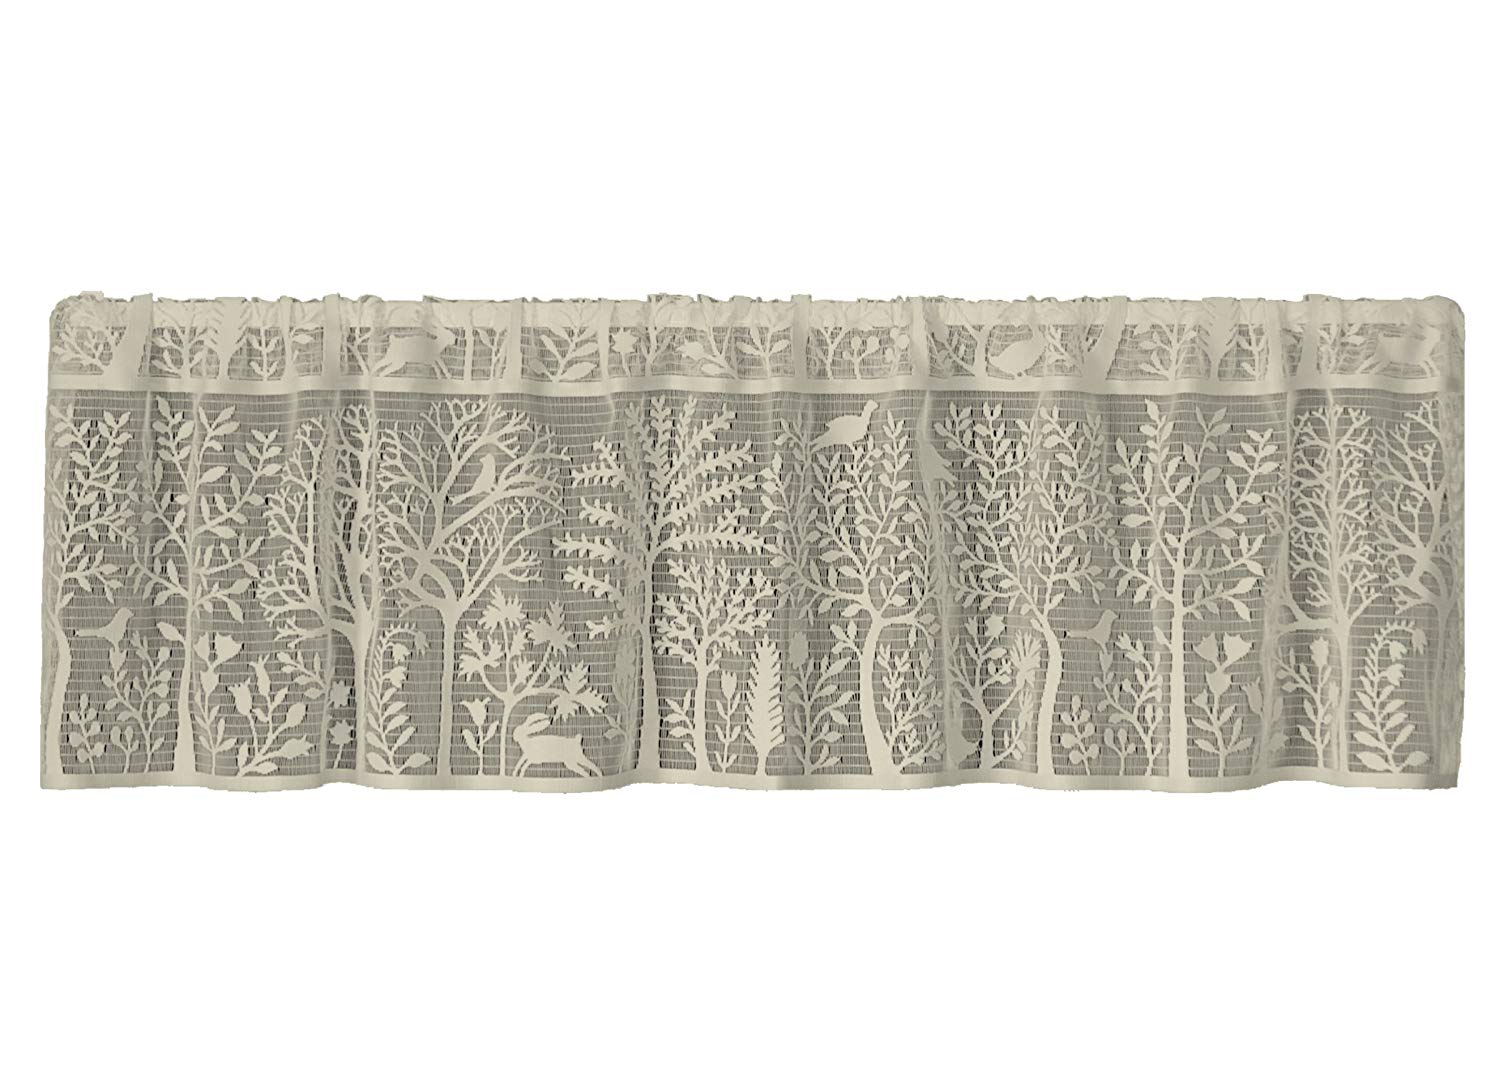 Heritage Lace Rabbit Hollow Collection   -Valances, Tiers, Panels, Swags, T Towels, Runners, etc in 3 Colors - Olde Church Emporium